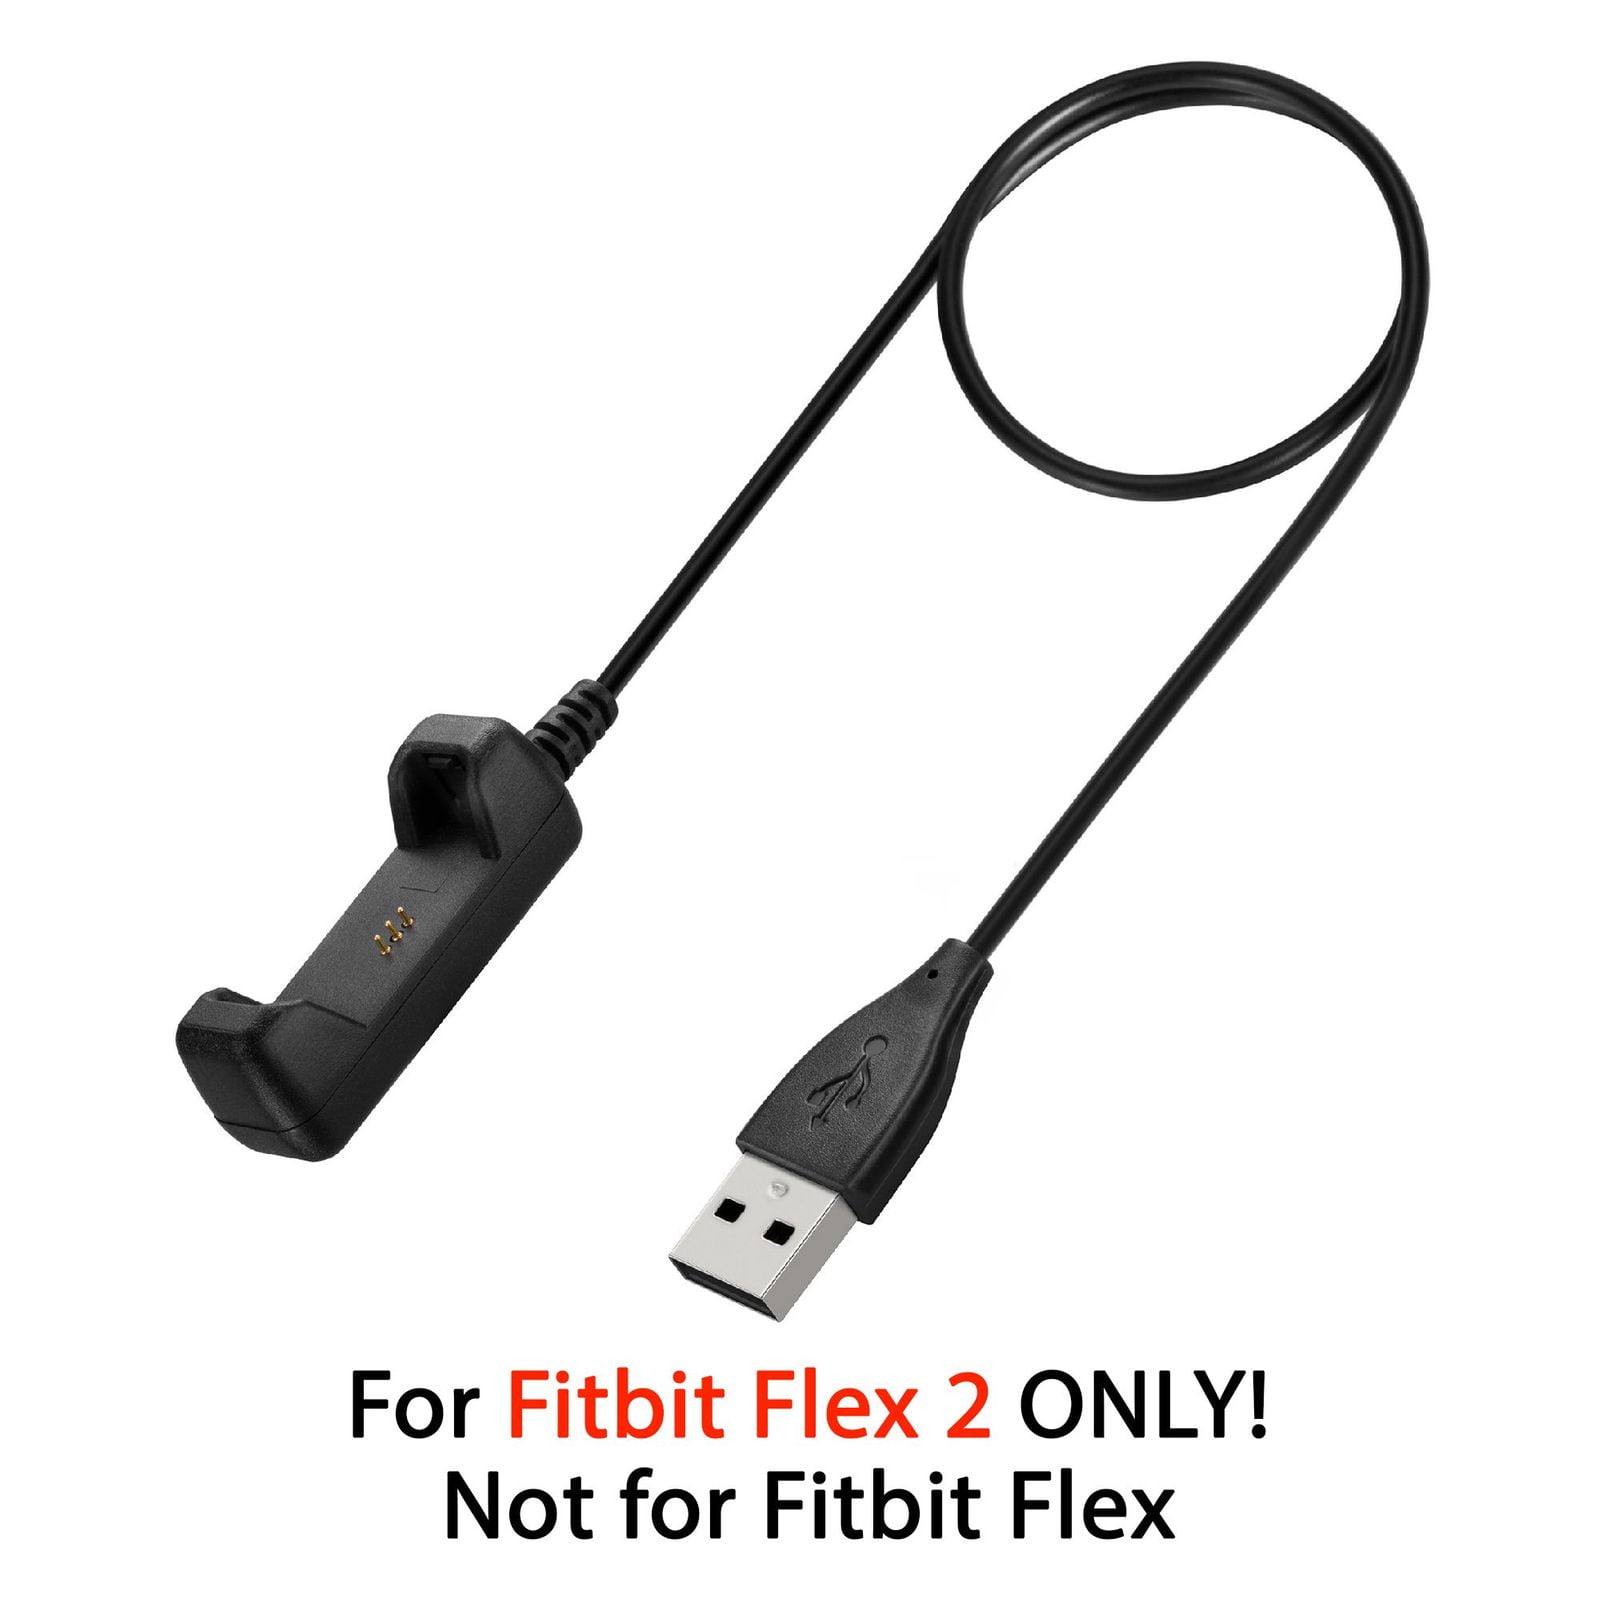 IL/PL1-3646-FitbitParts-UG Fitbit Flex Replacement Parts Fitbit NOT included 